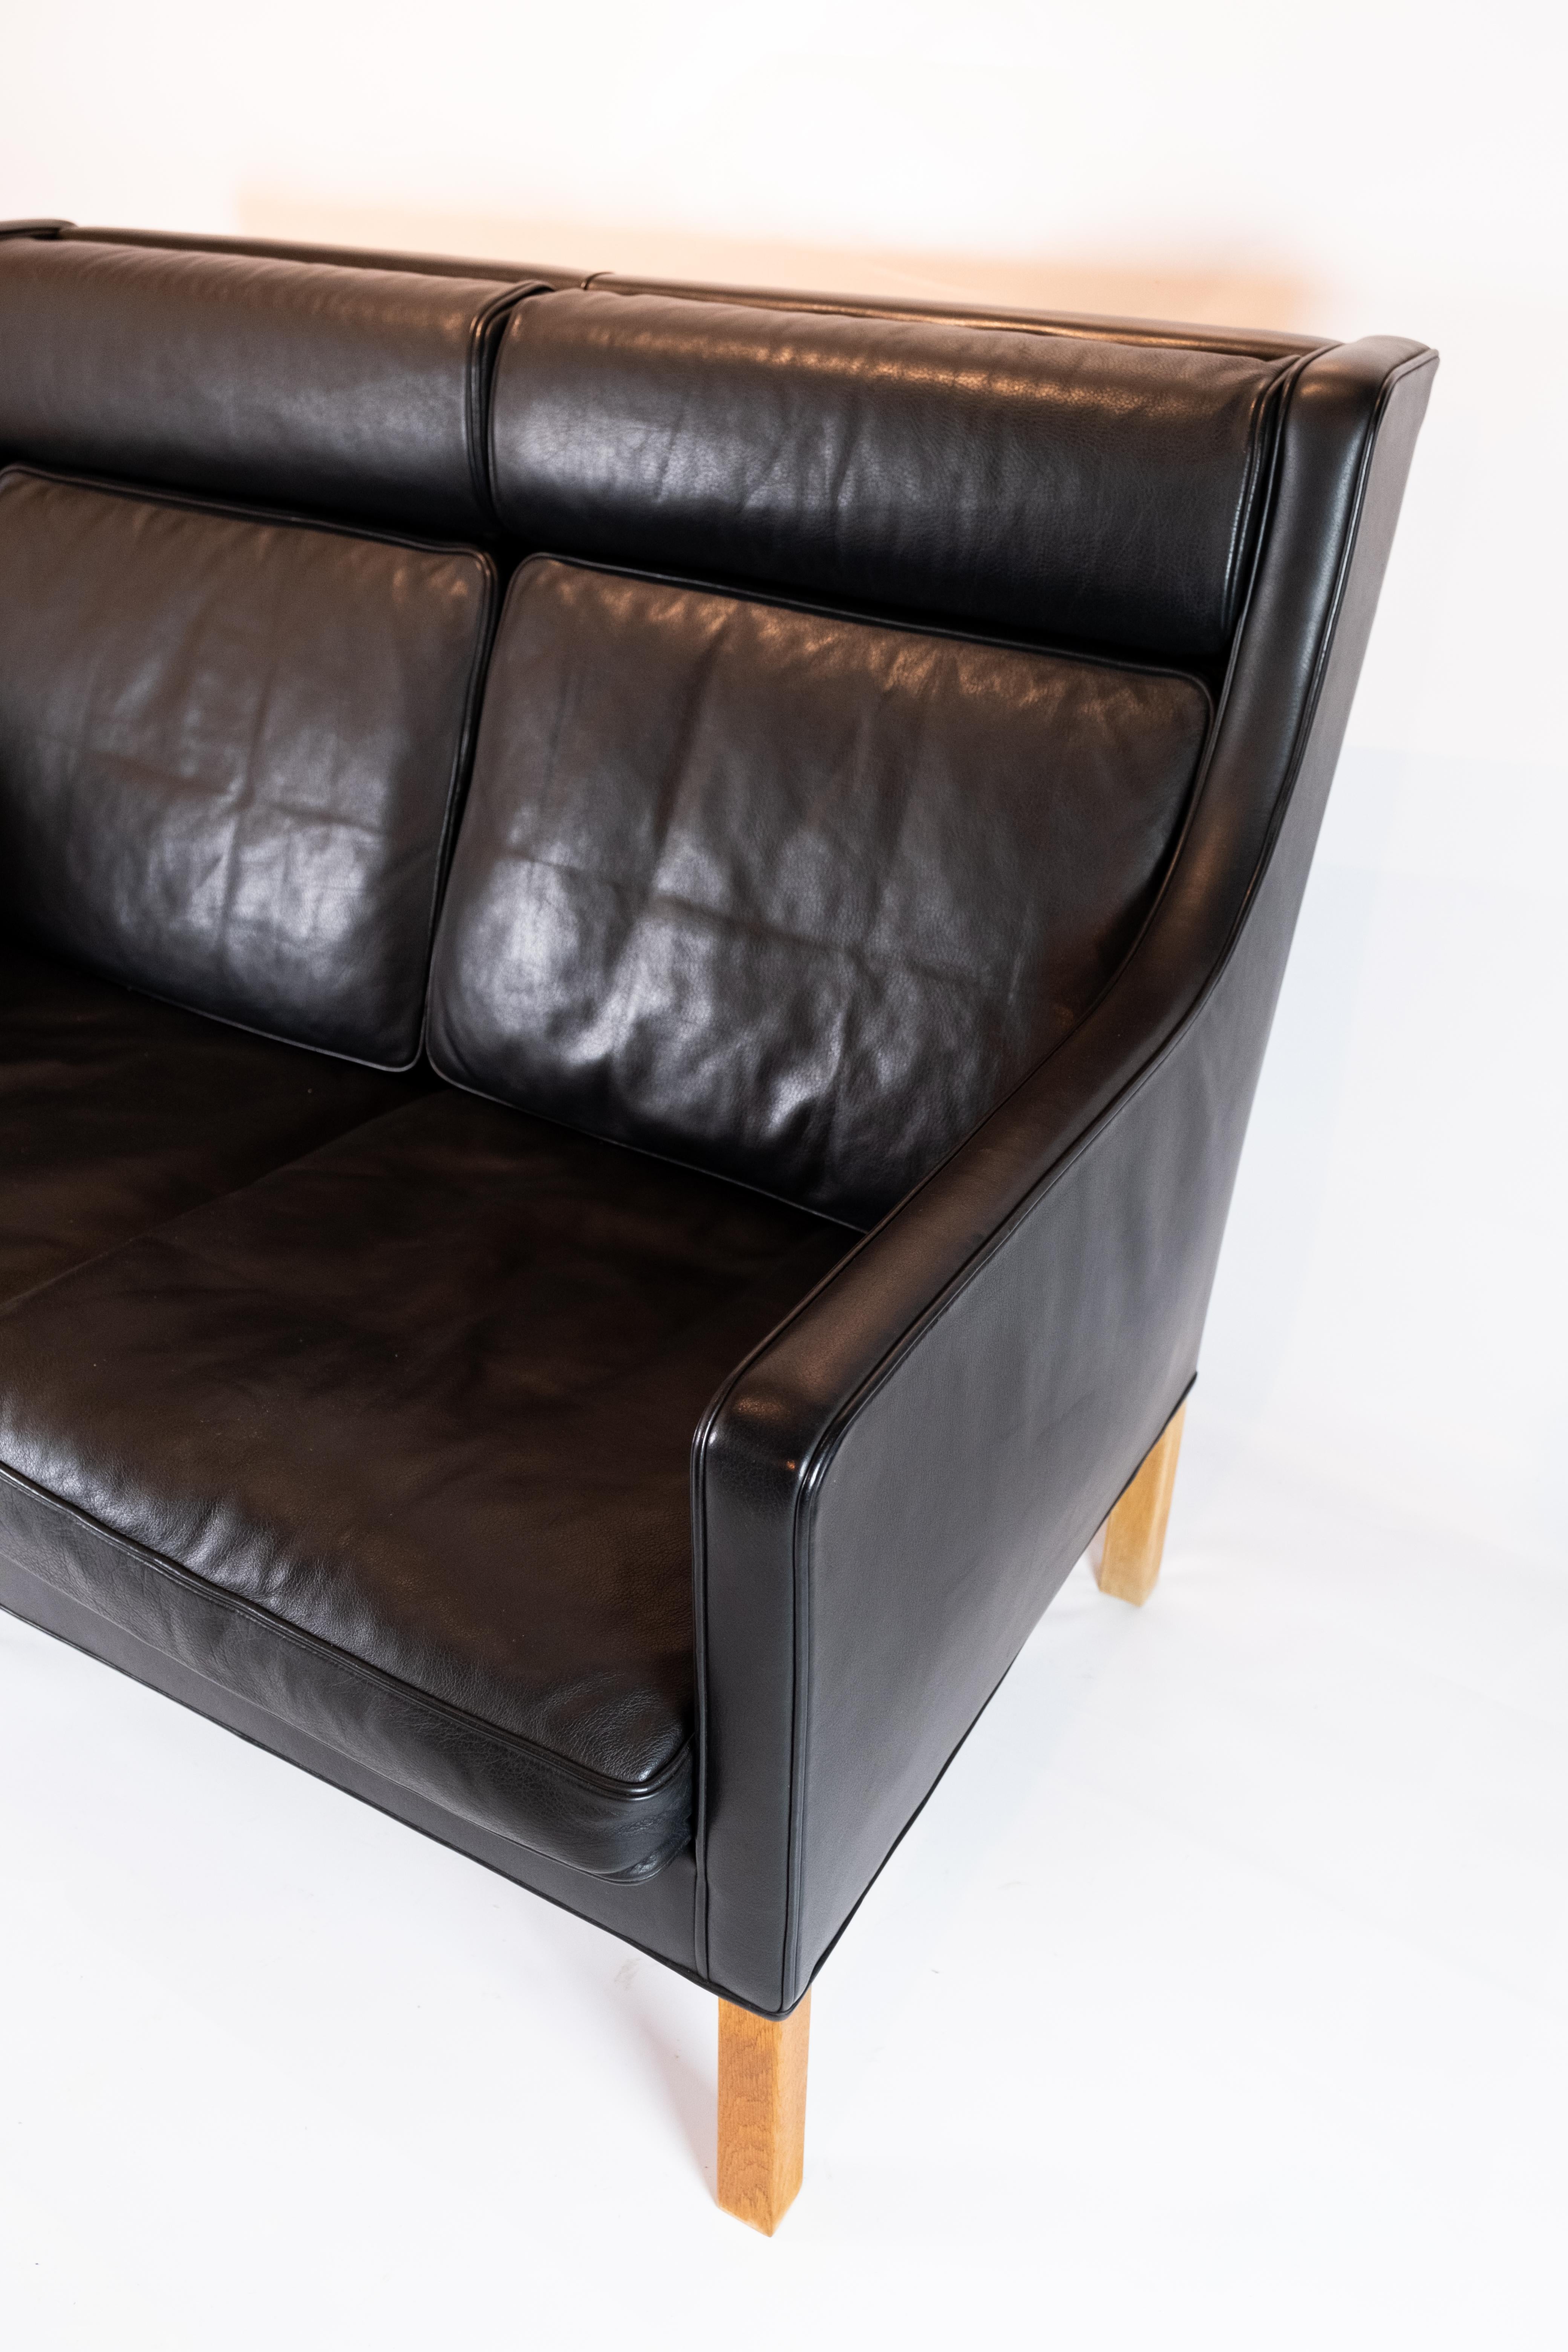 Mid-Century Modern Kupe 2-Seat Sofa Model 2192 Made In Black Leather By Børge Mogensen From 1970s For Sale